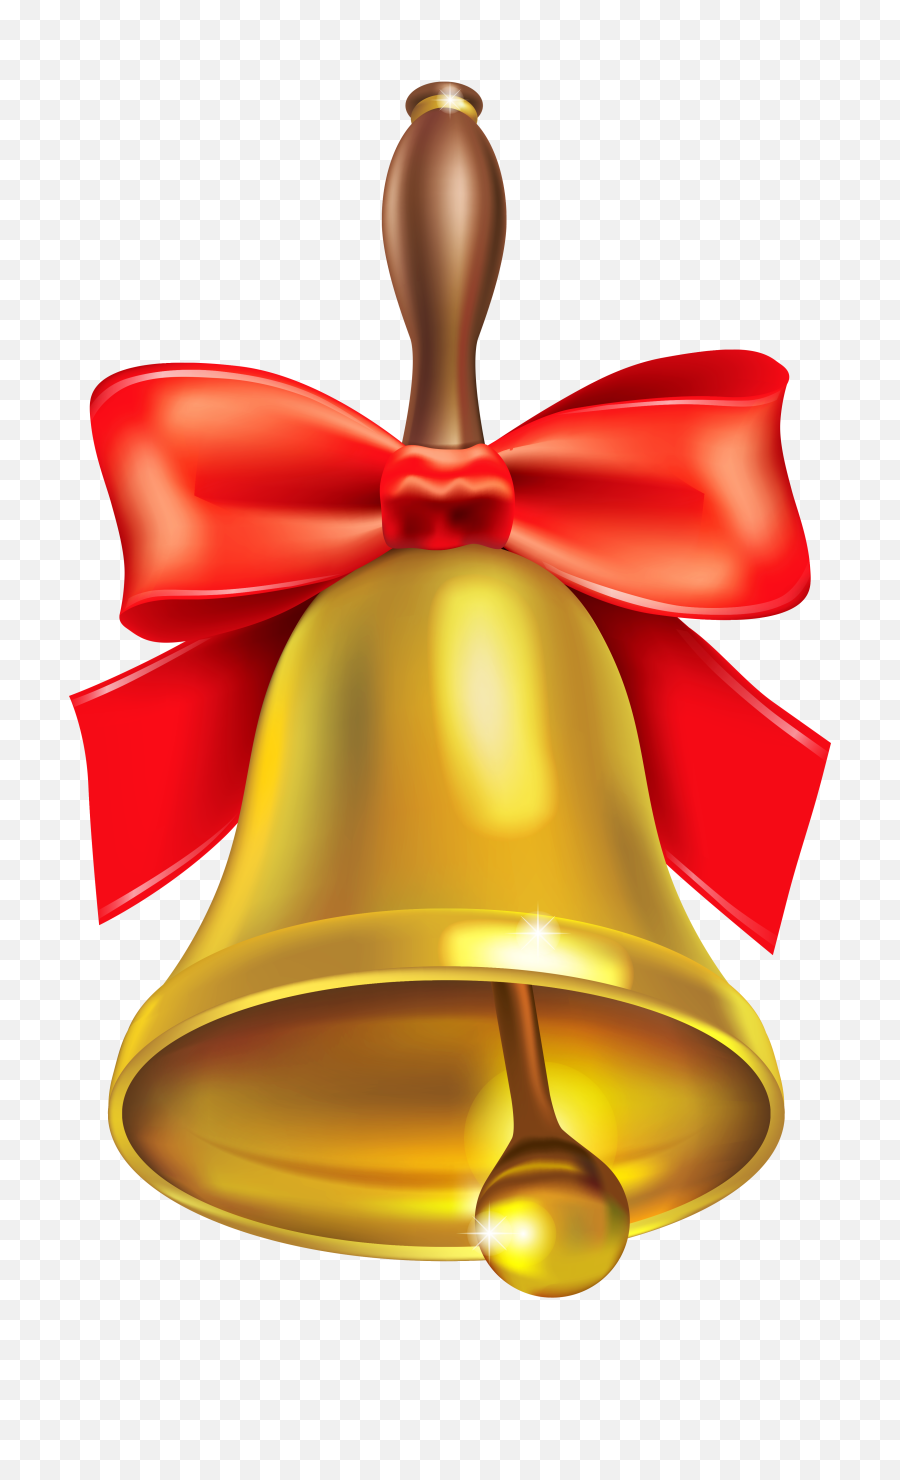 Christmas Bell With Bow Png Image - Purepng Free Christmas Bell Clip Art,Gold Bow Transparent Background